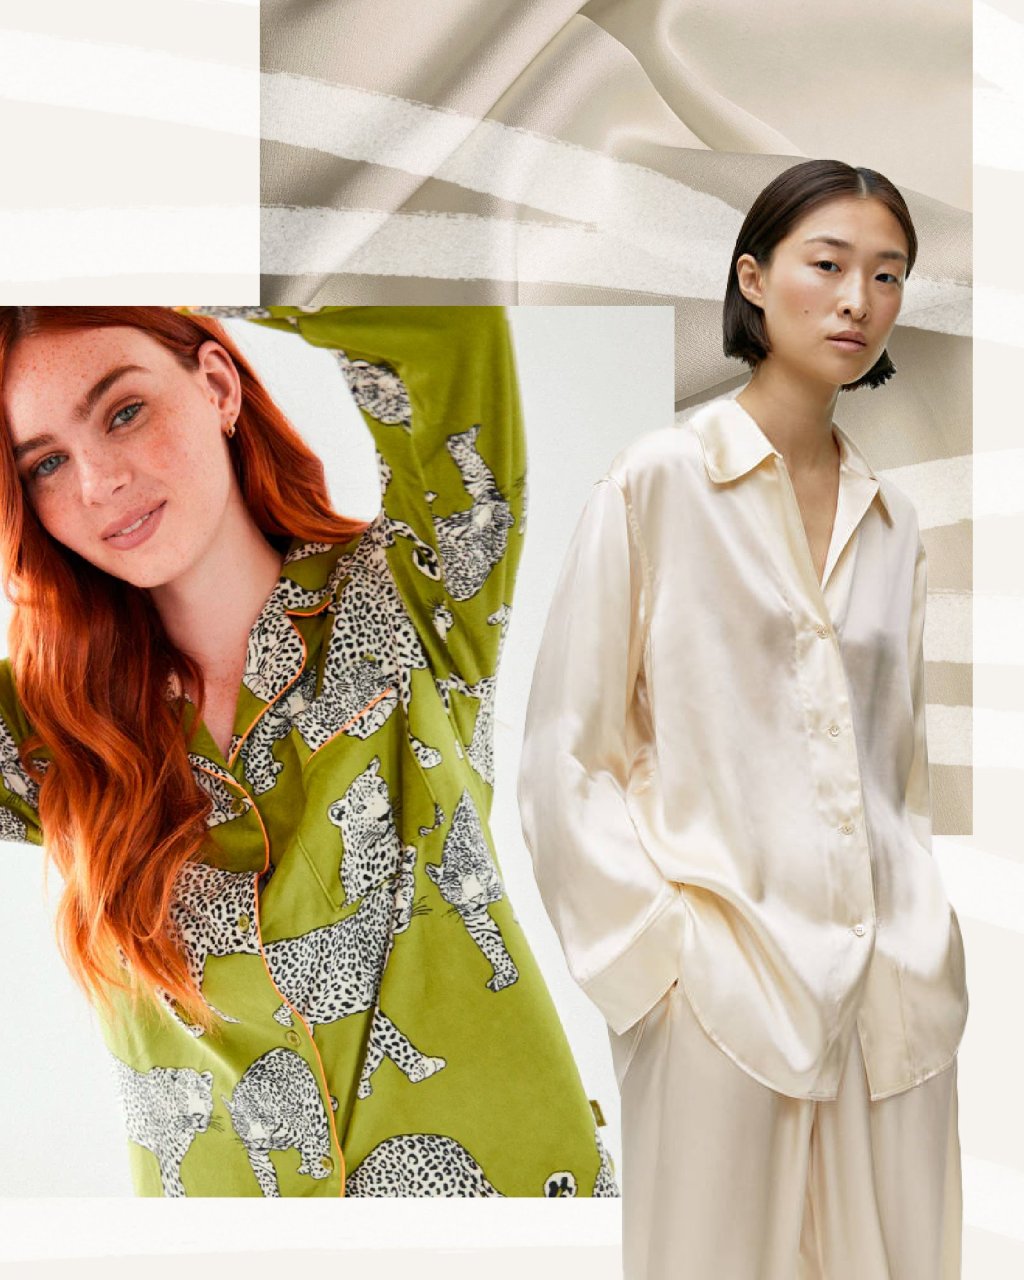 Silk Pyjamas From The High Street That Are Stylish And Affordable